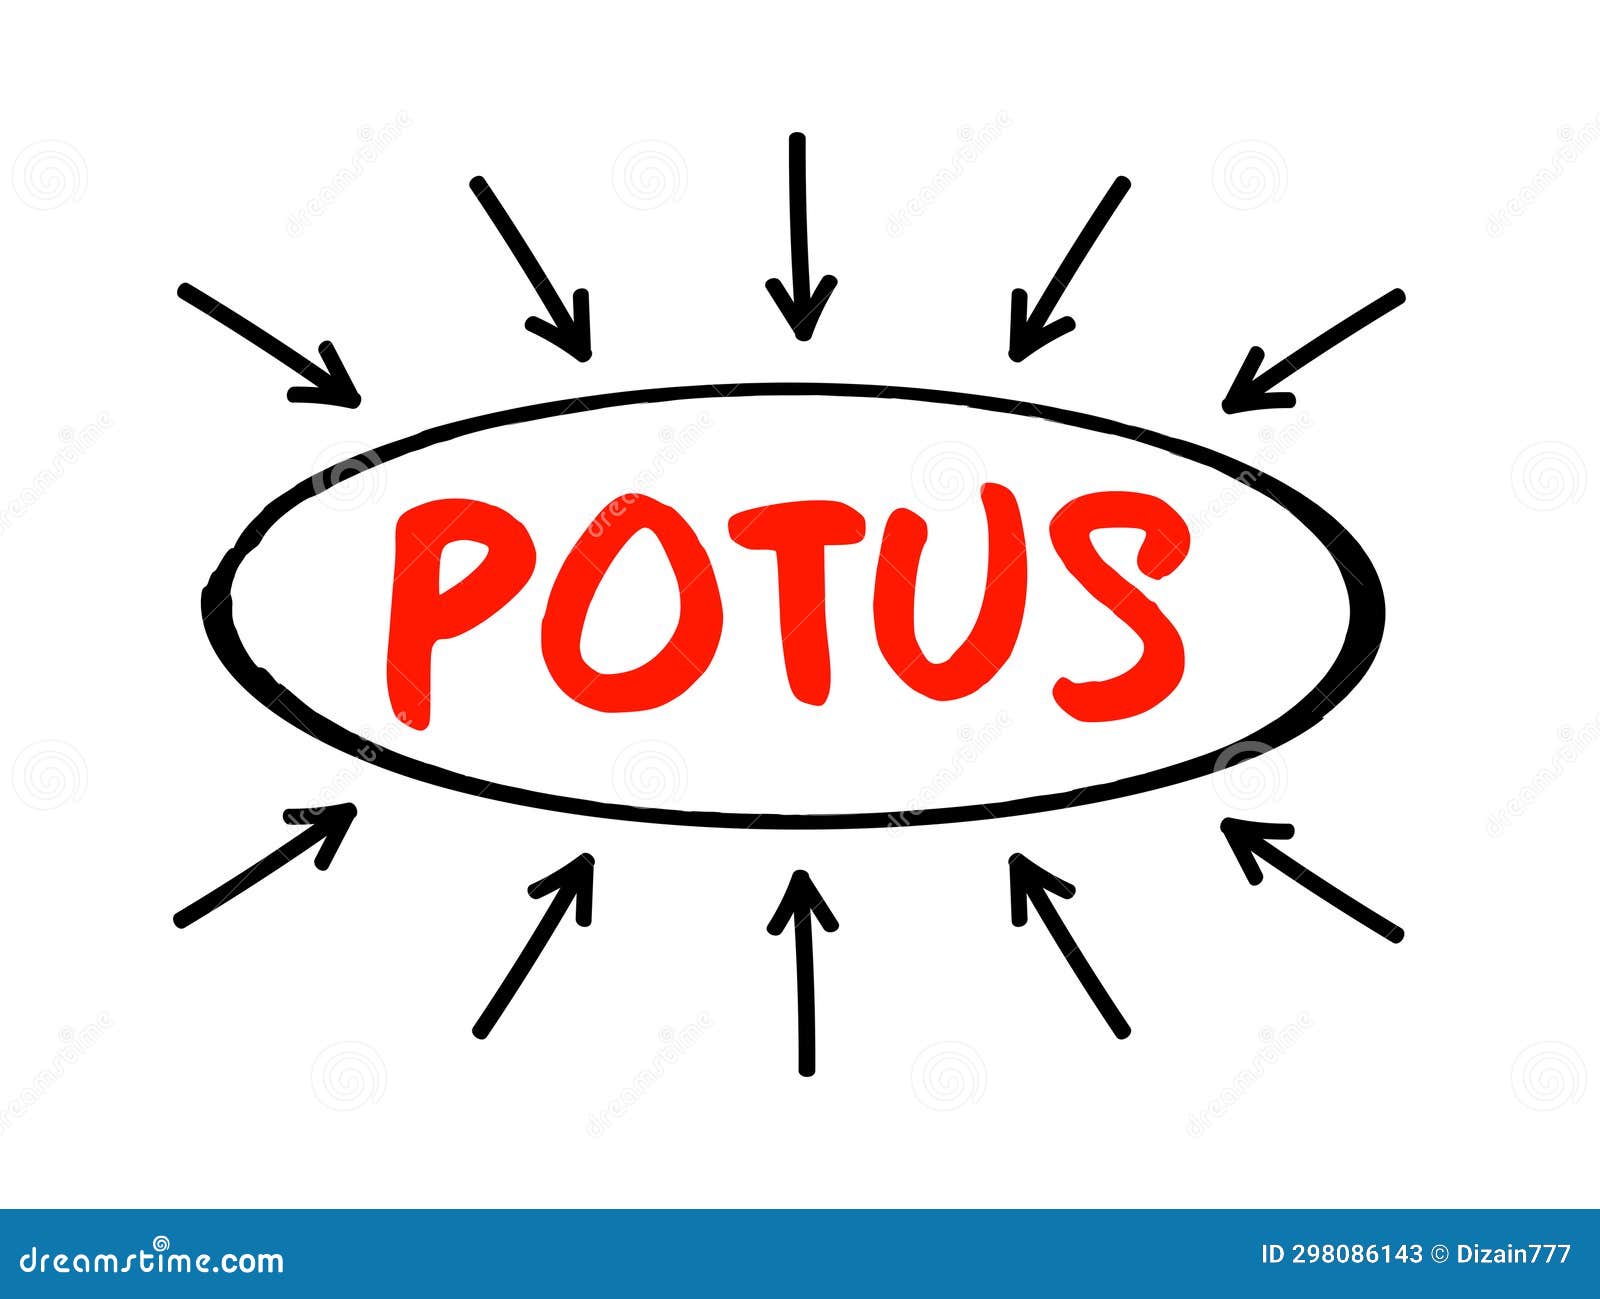 potus - president of the united states acronym text with arrows, concept background